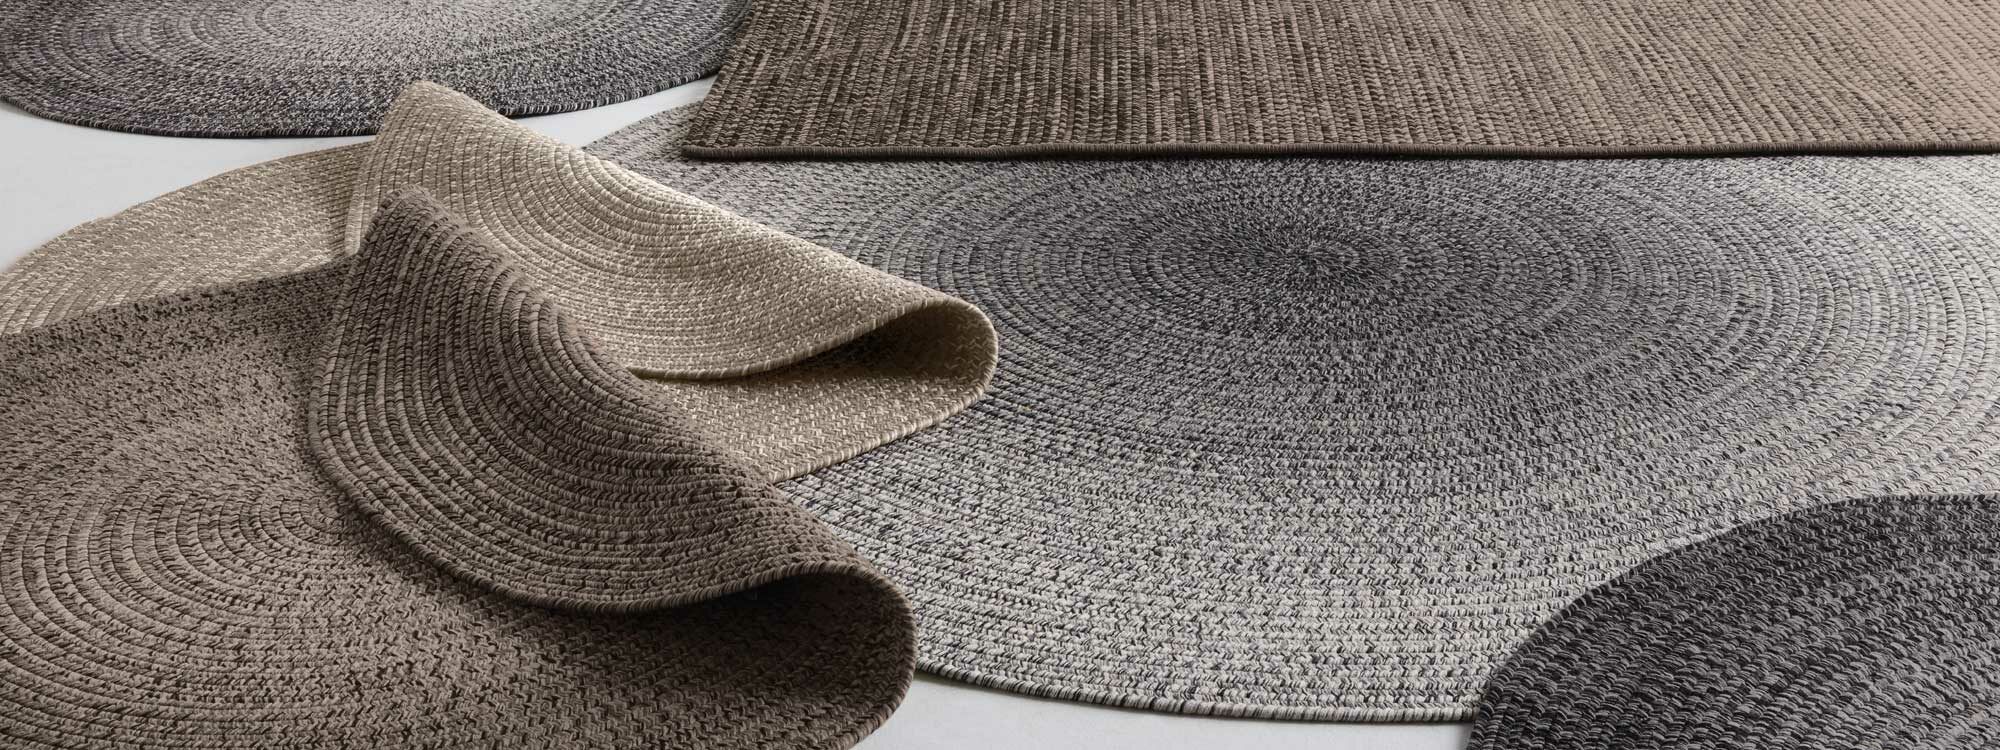 Studio image of round & rectangular Gloster garden rugs and carpets laid over one another